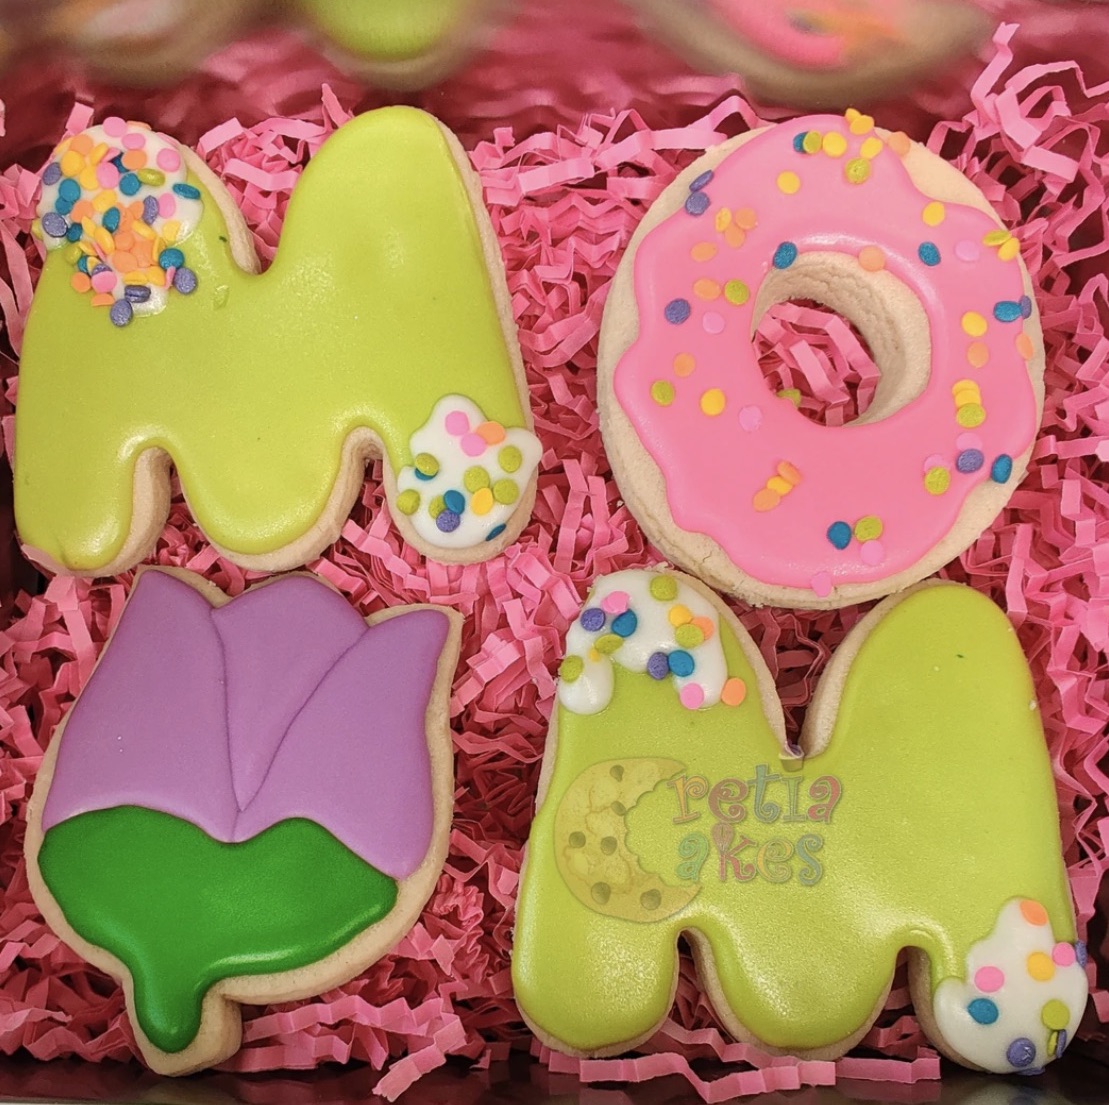 A photo of cookies that spell MOM and are decorated with colorful frosting